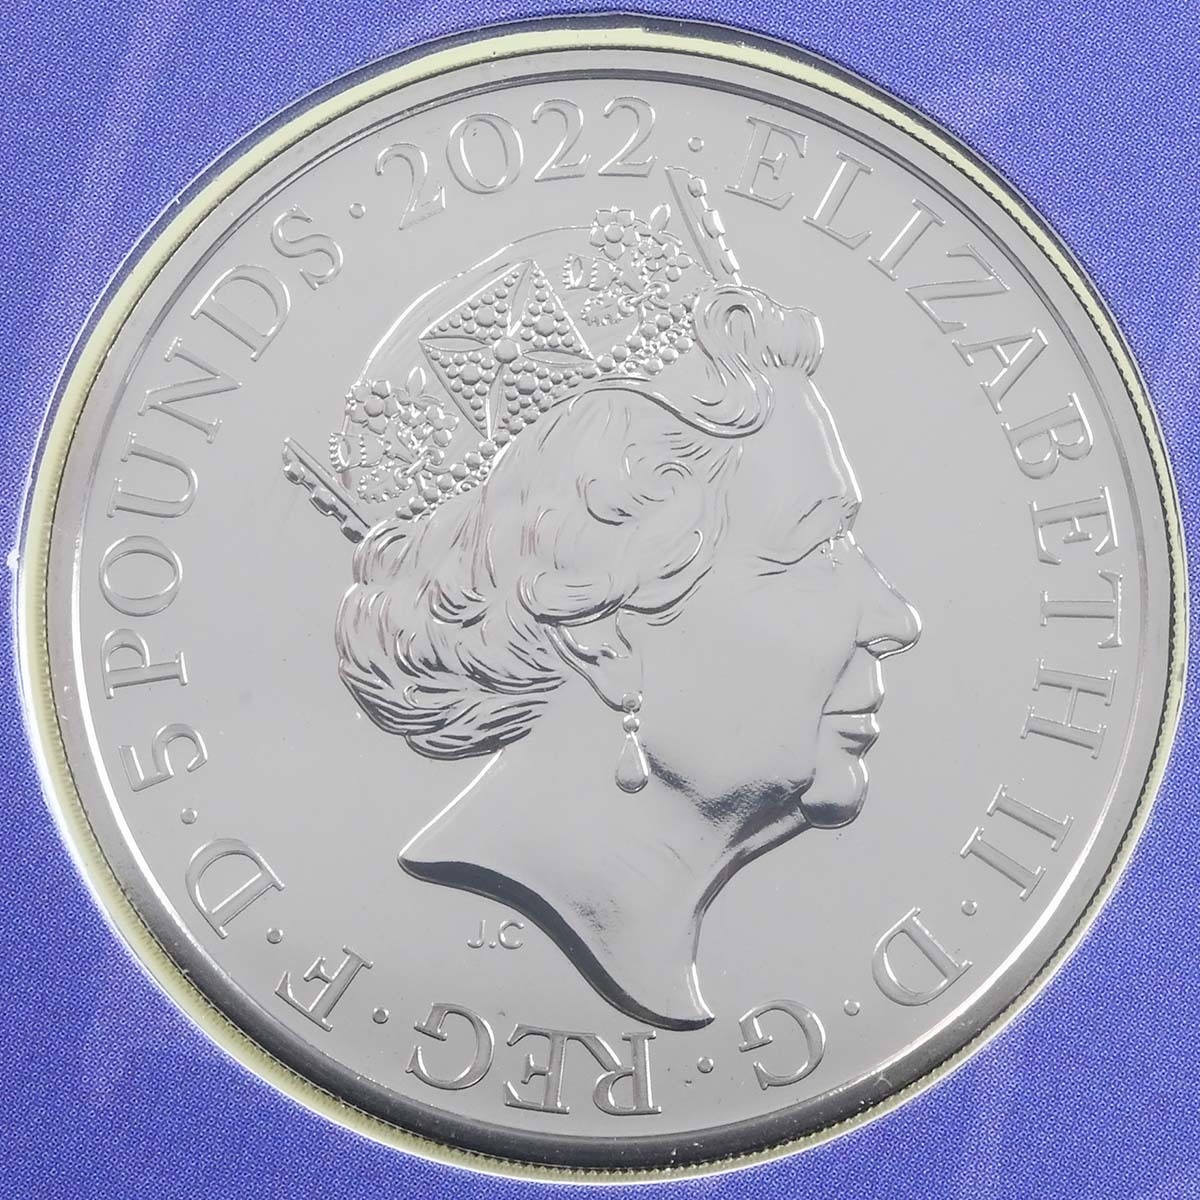 UK22QCBU 2022 Queen Elizabeth II Reign Commonwealth Of Nations Five Pound Crown Brilliant Uncirculated Coin In Folder Obverse